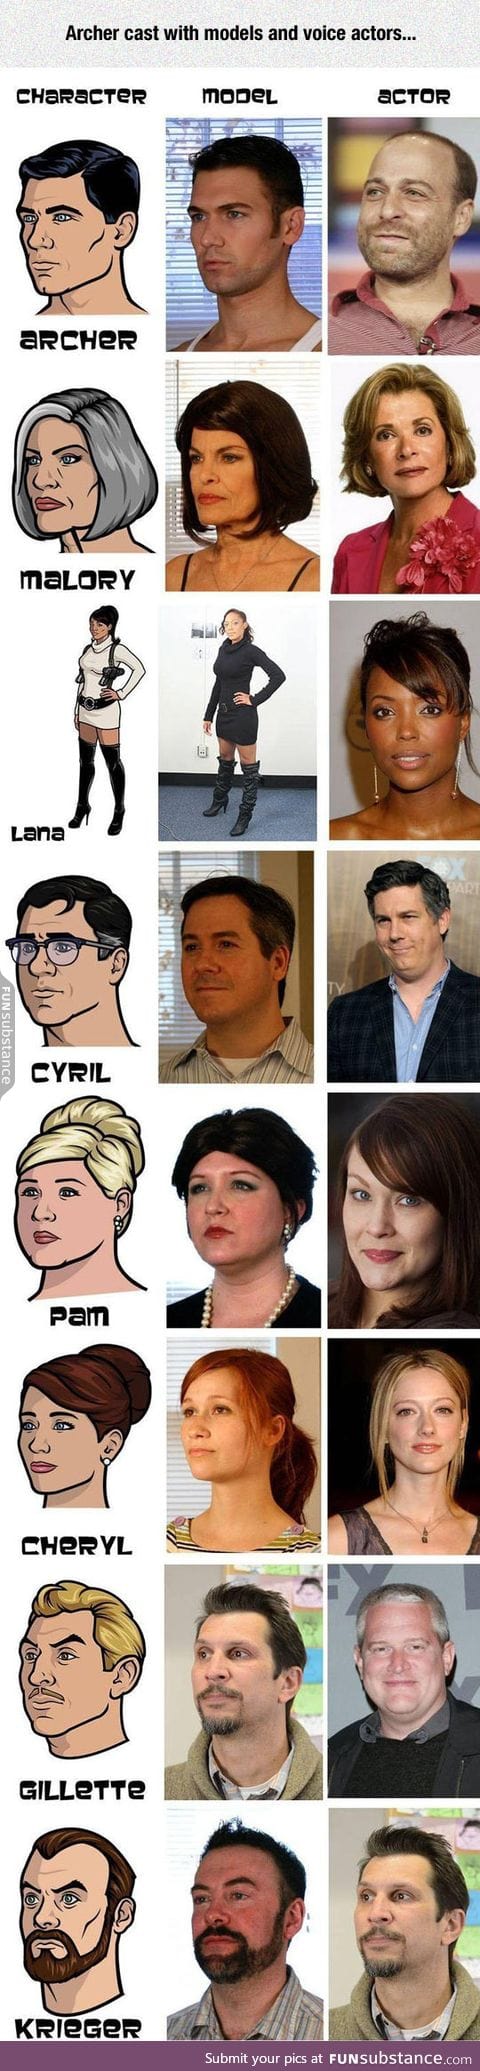 The entire cast of archer